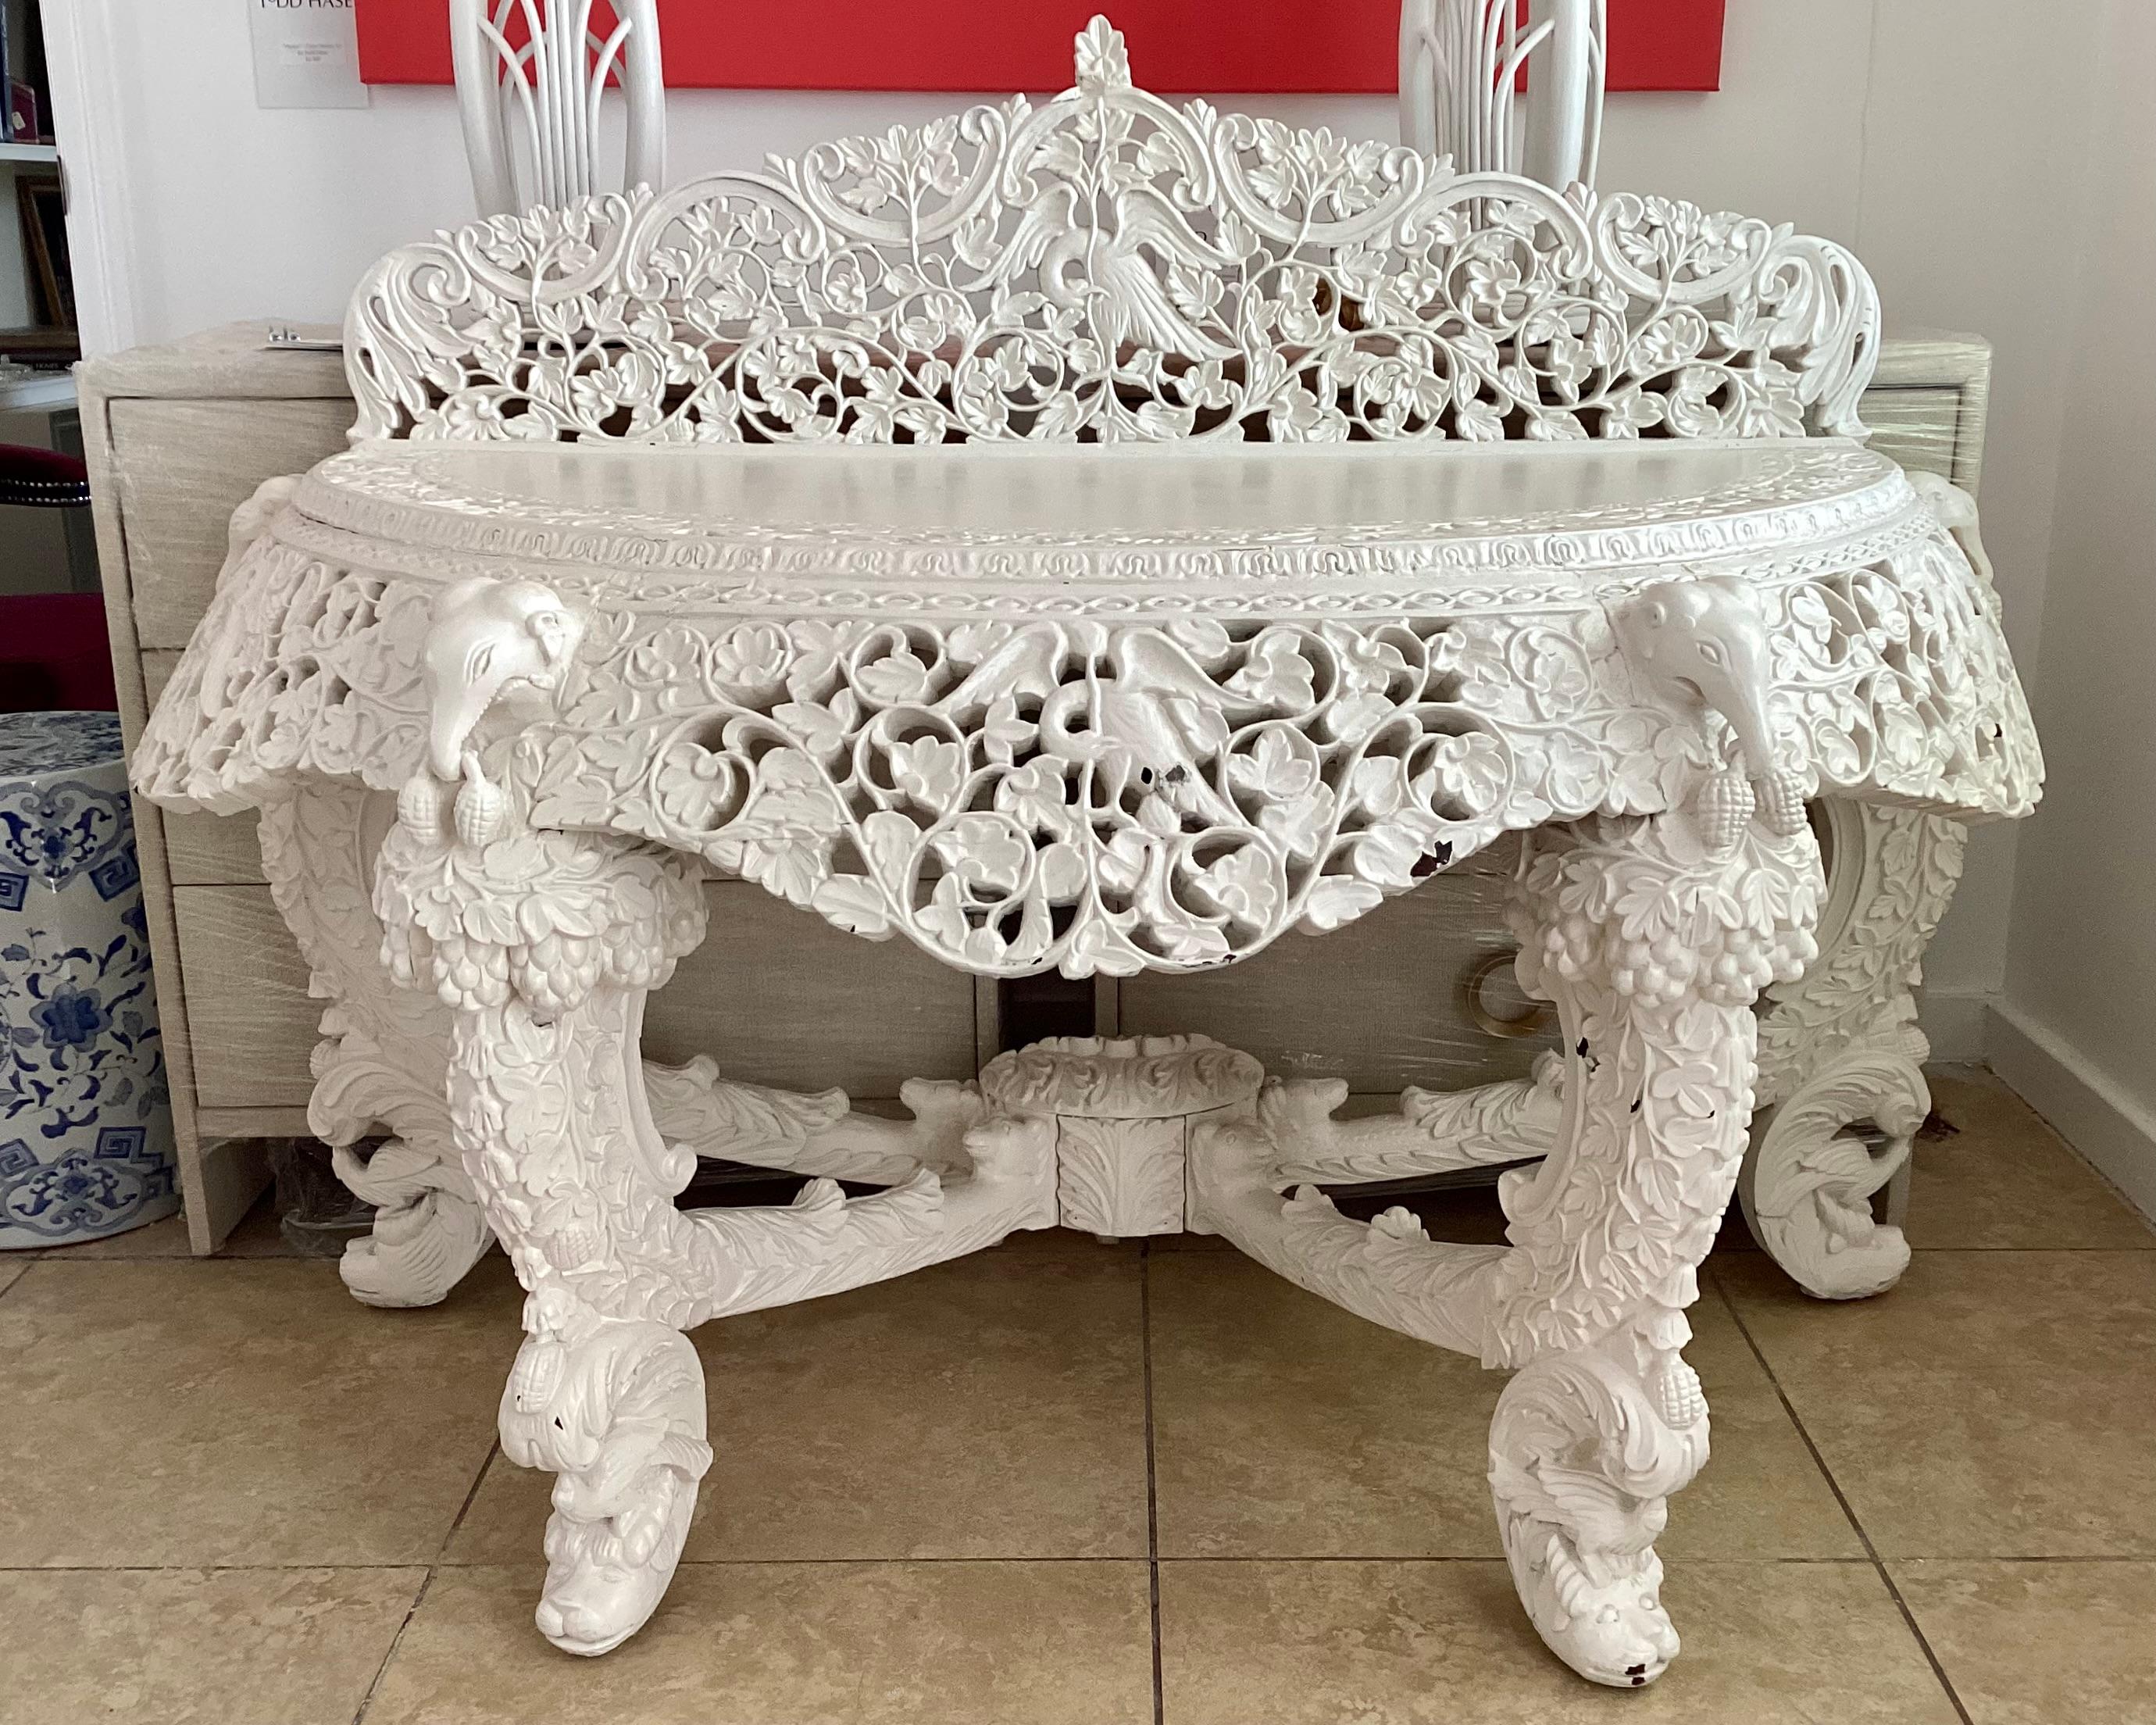 Anglo Indian console table with very detailed and complex carvings freshly lacquered in ivory. There are carvings on most of the table with exception of the surface. Add some serious style to your home.